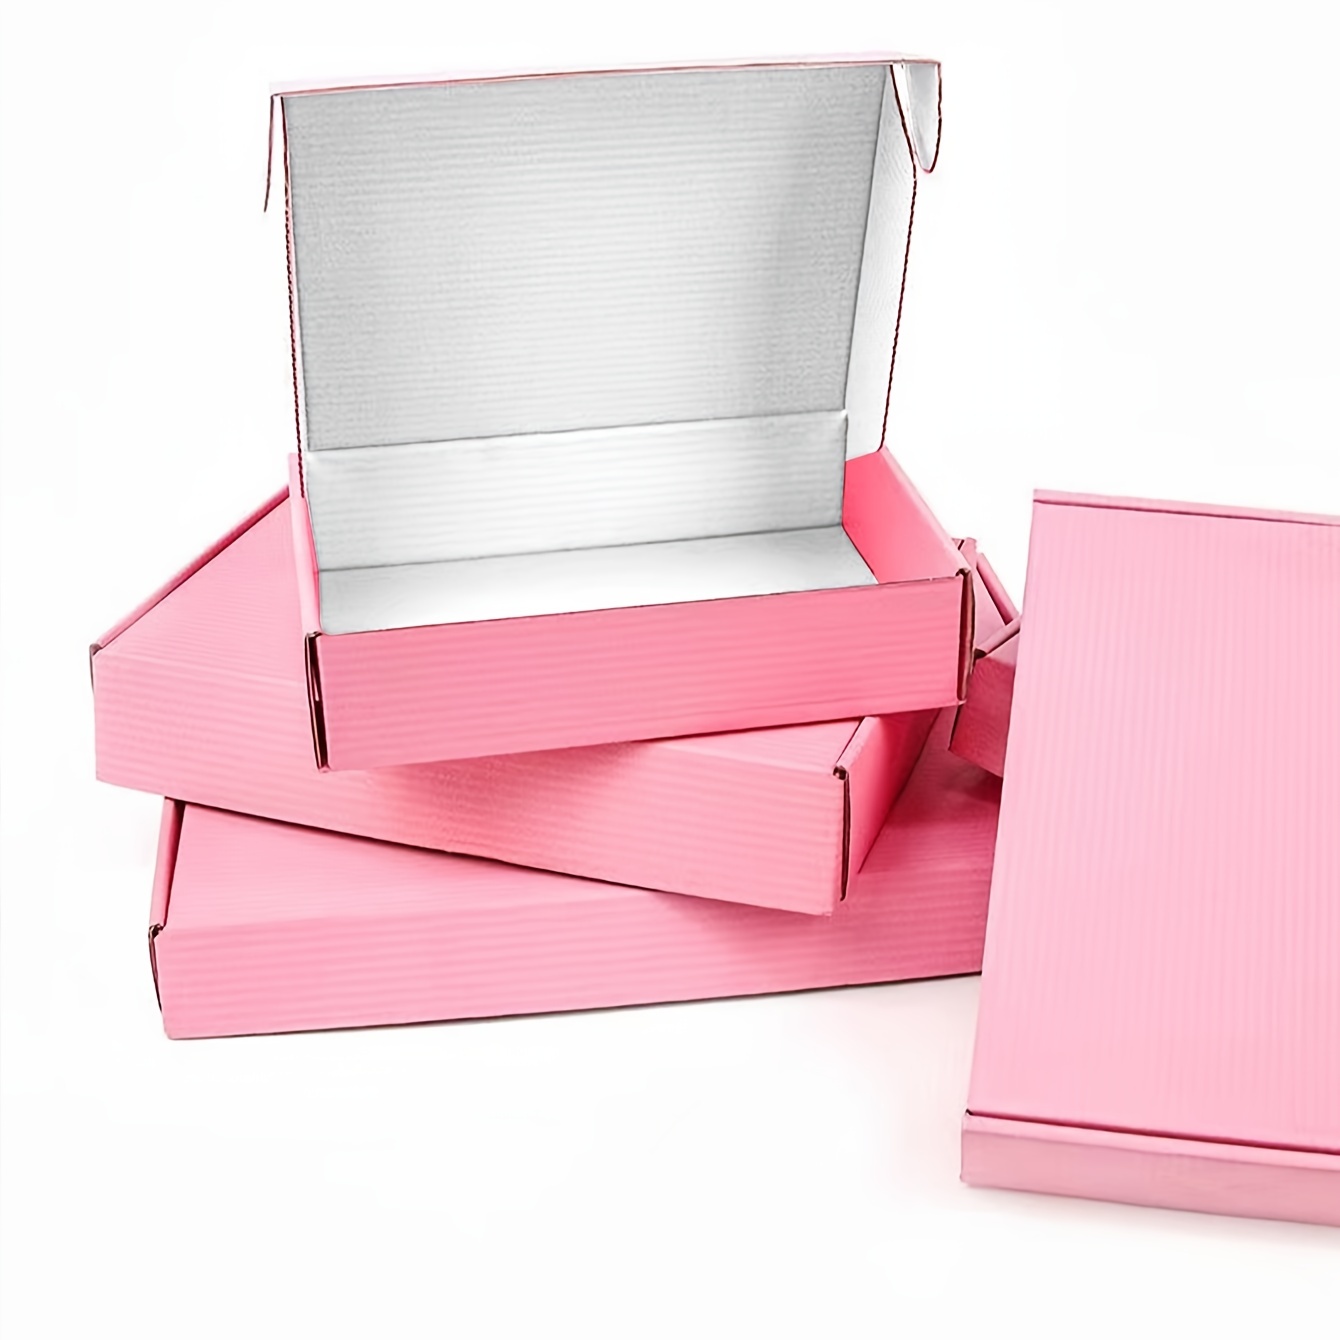 

4pcs, Airplane Box Party Gift Packaging Box Storage Box Holiday Candy Decoration Box, Cheapest Items Available, Small Business Supplies, Packaging Box, Wedding Decorations, Gift Box, Wedding Stuff